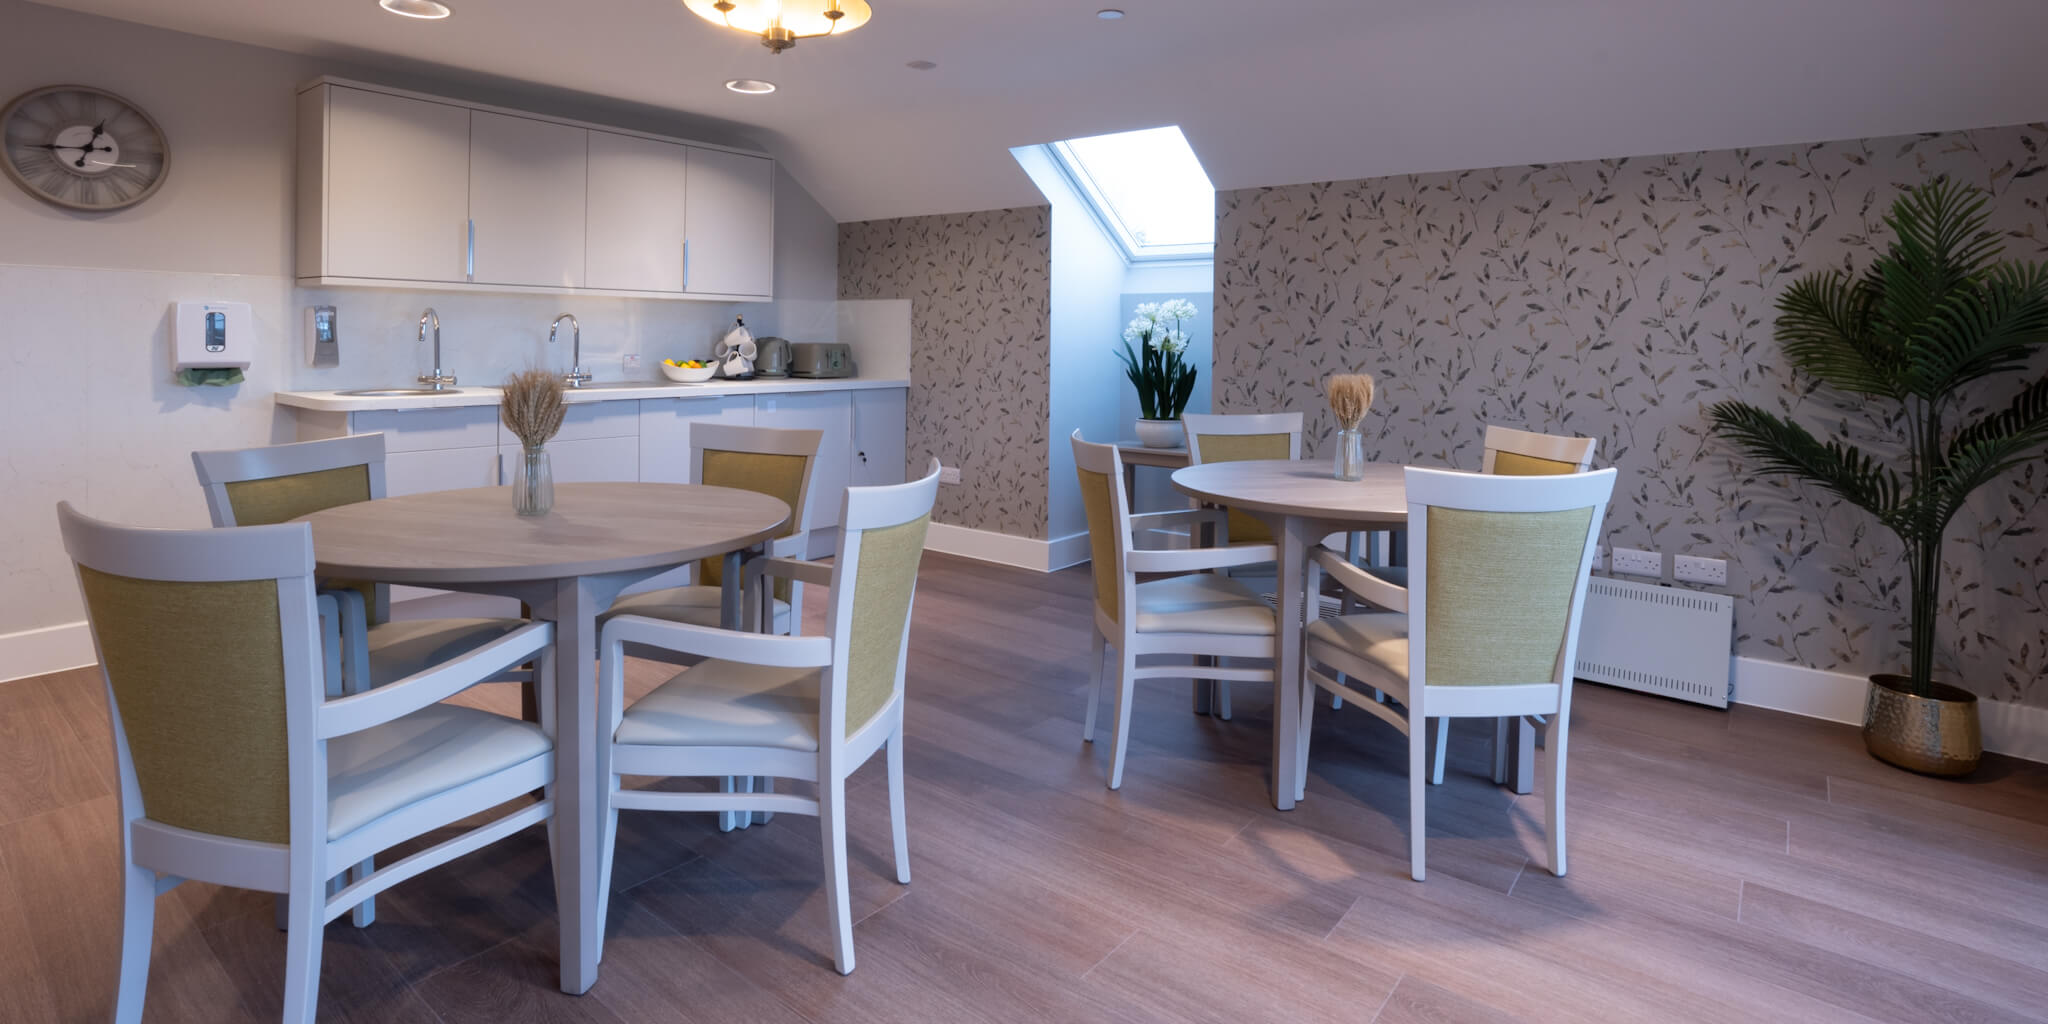 Dining Room for Mealtimes at Rowan Park Care Home